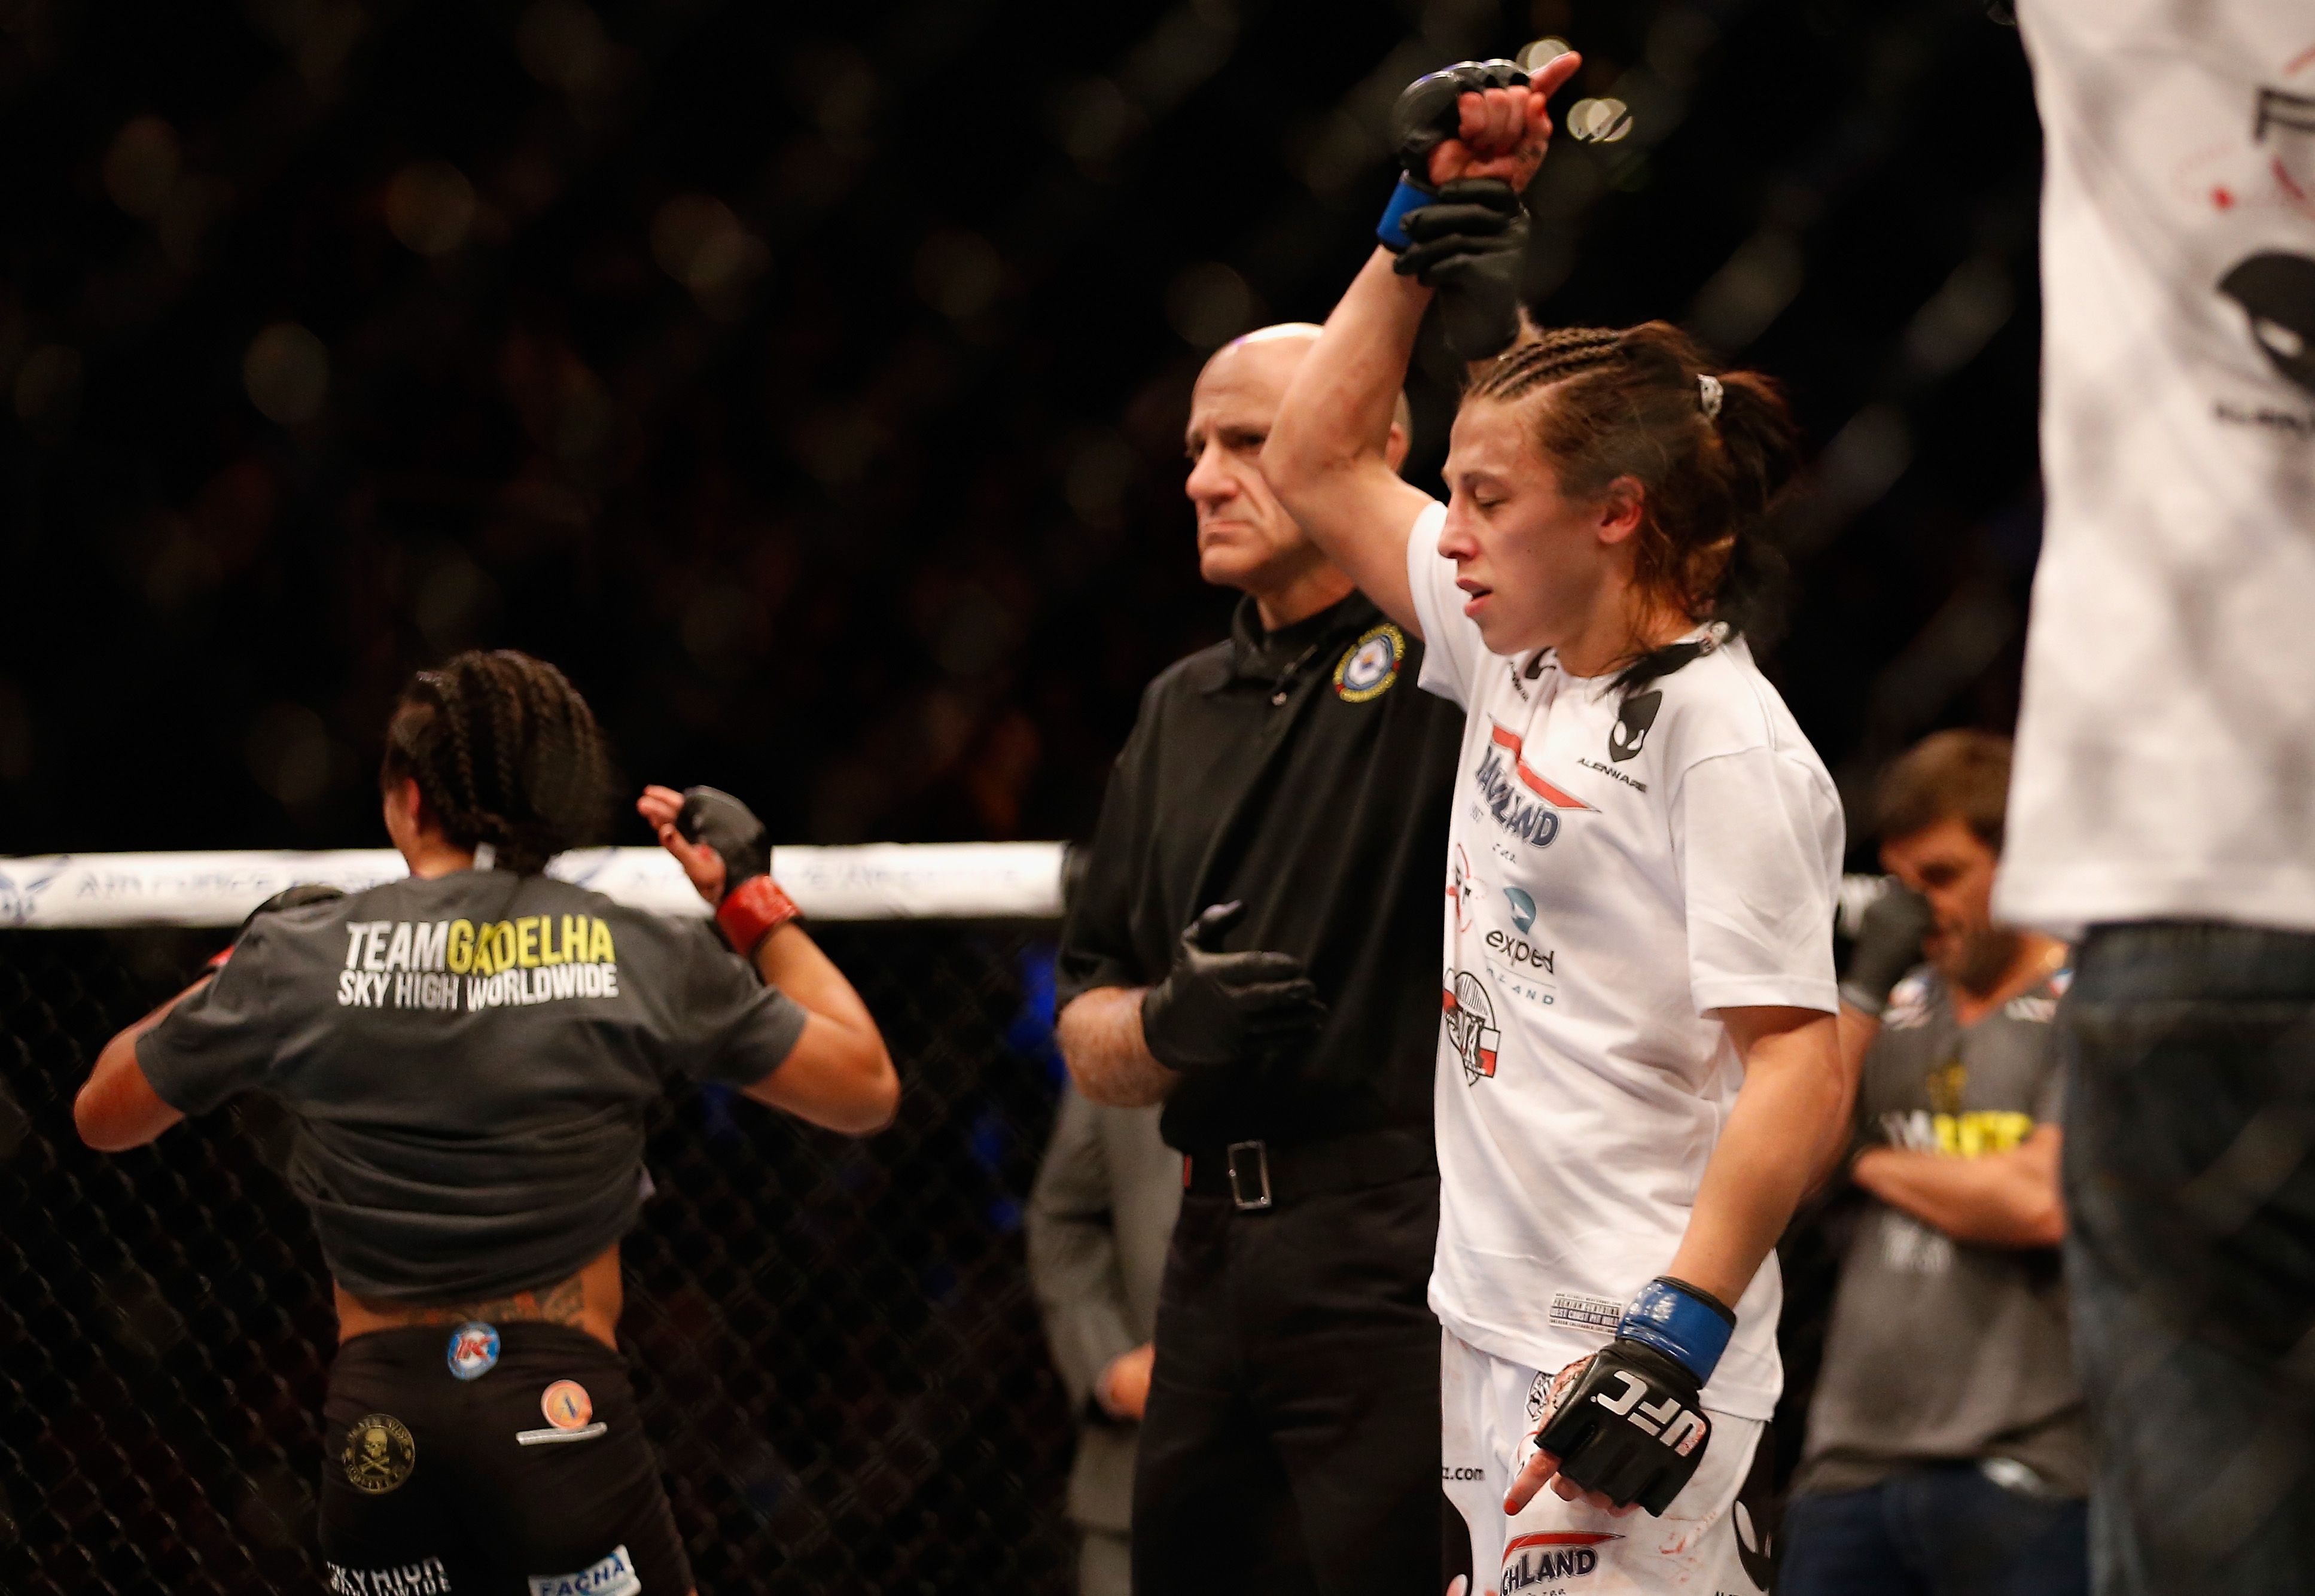 PHOENIX, AZ - DECEMBER 13: Joanna Jedrzejczyk (R) celebrates her victory by decision over Claudia Gadelha in their women's strawweight bout during the UFC Fight Night event at the at U.S. Airways Center on December 13, 2014 in Phoenix, Arizona. (Photo by Christian Petersen/Getty Images)